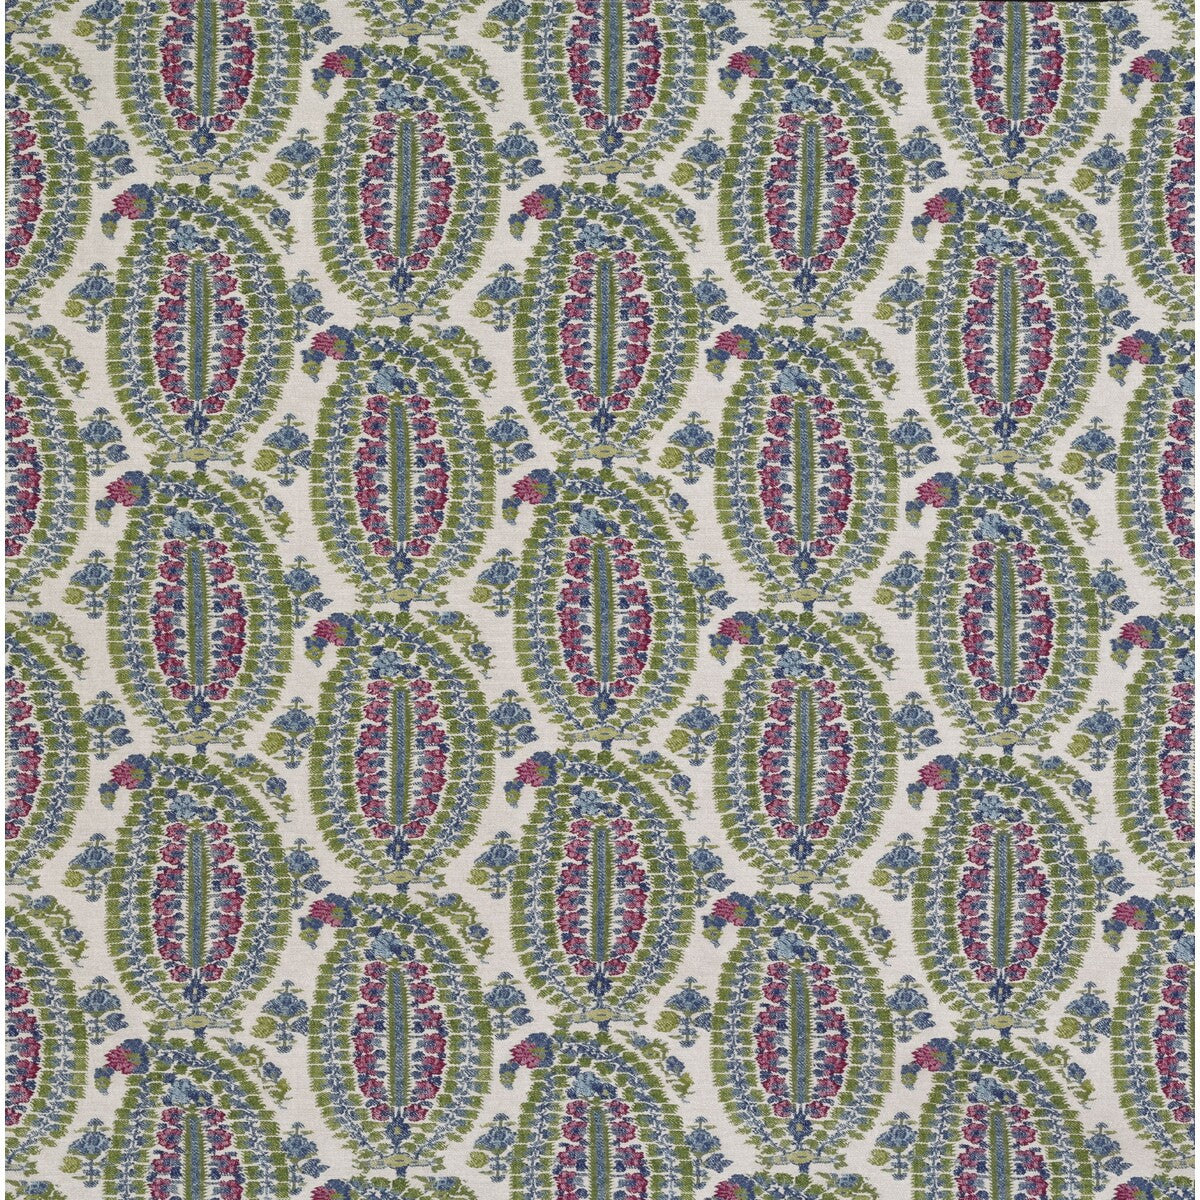 Anoushka fabric in pink/blue color - pattern BFC-3660.75.0 - by Lee Jofa in the Blithfield collection